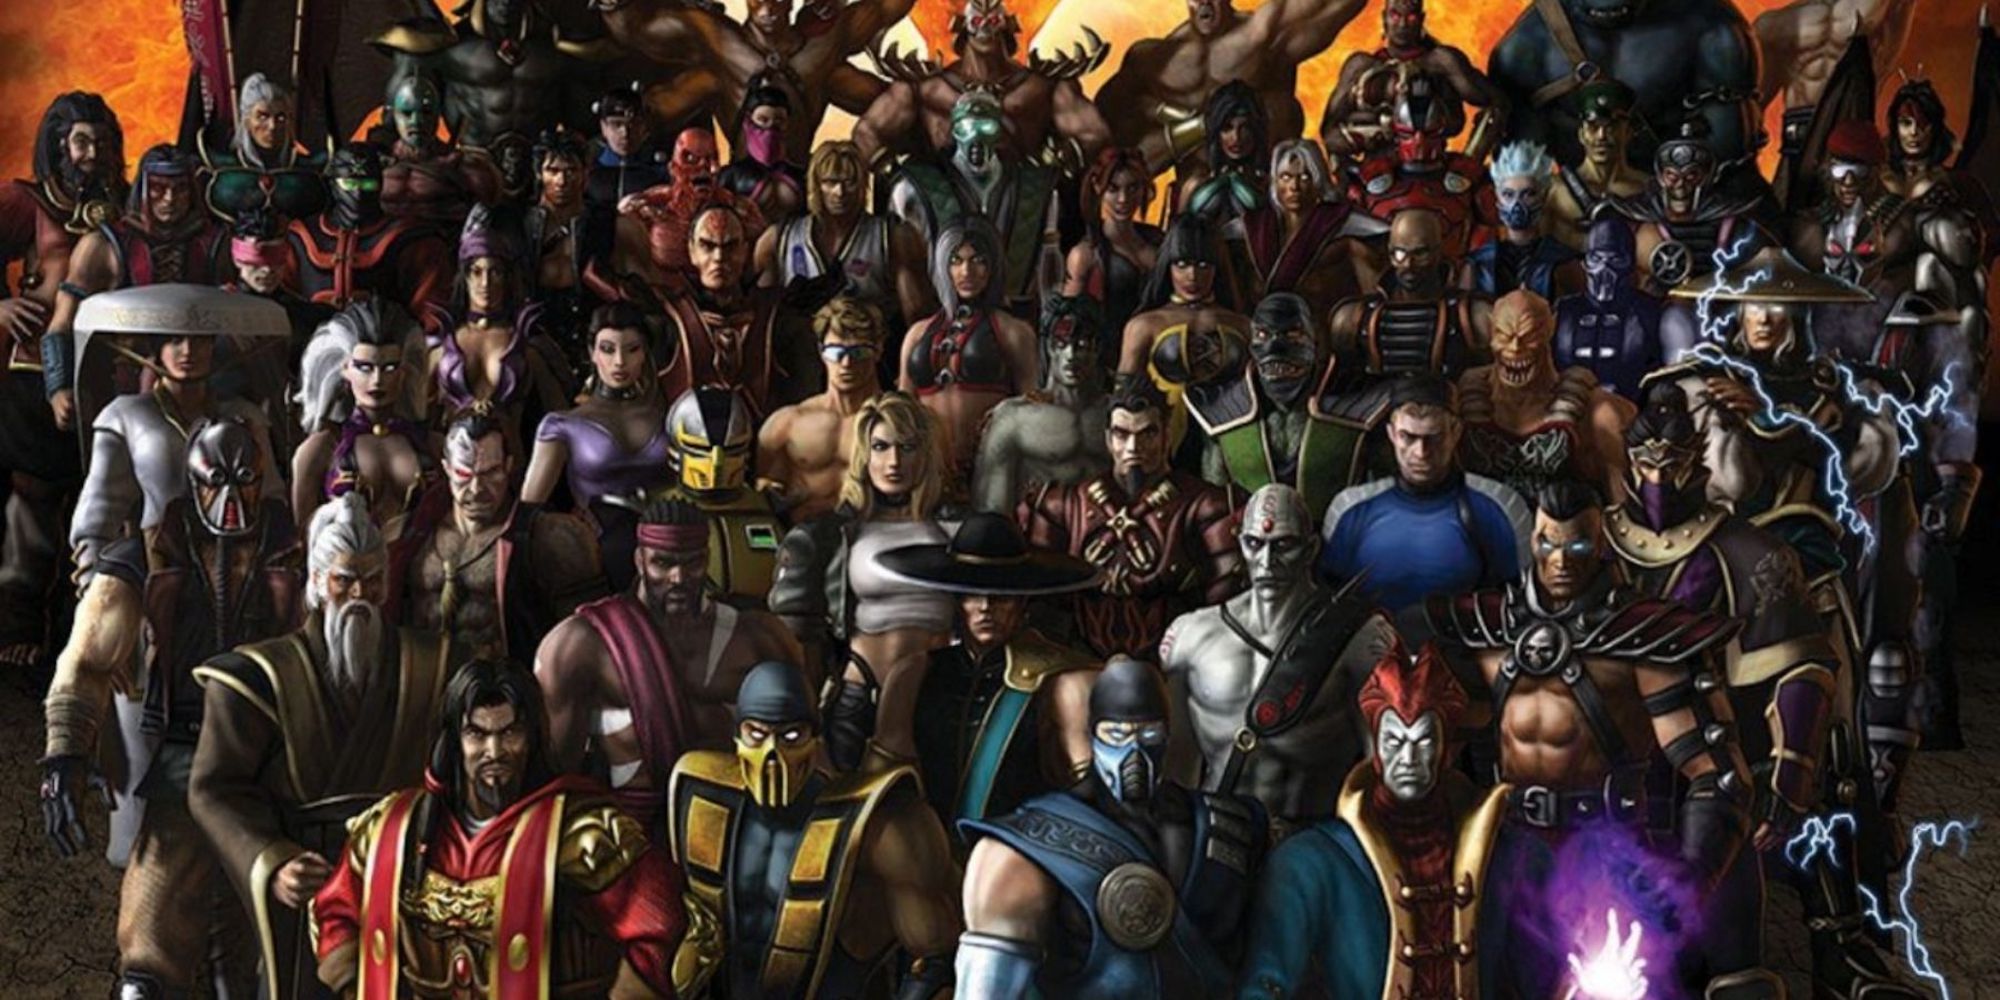 All the Mortal Kombat characters stand facing forward in a large group